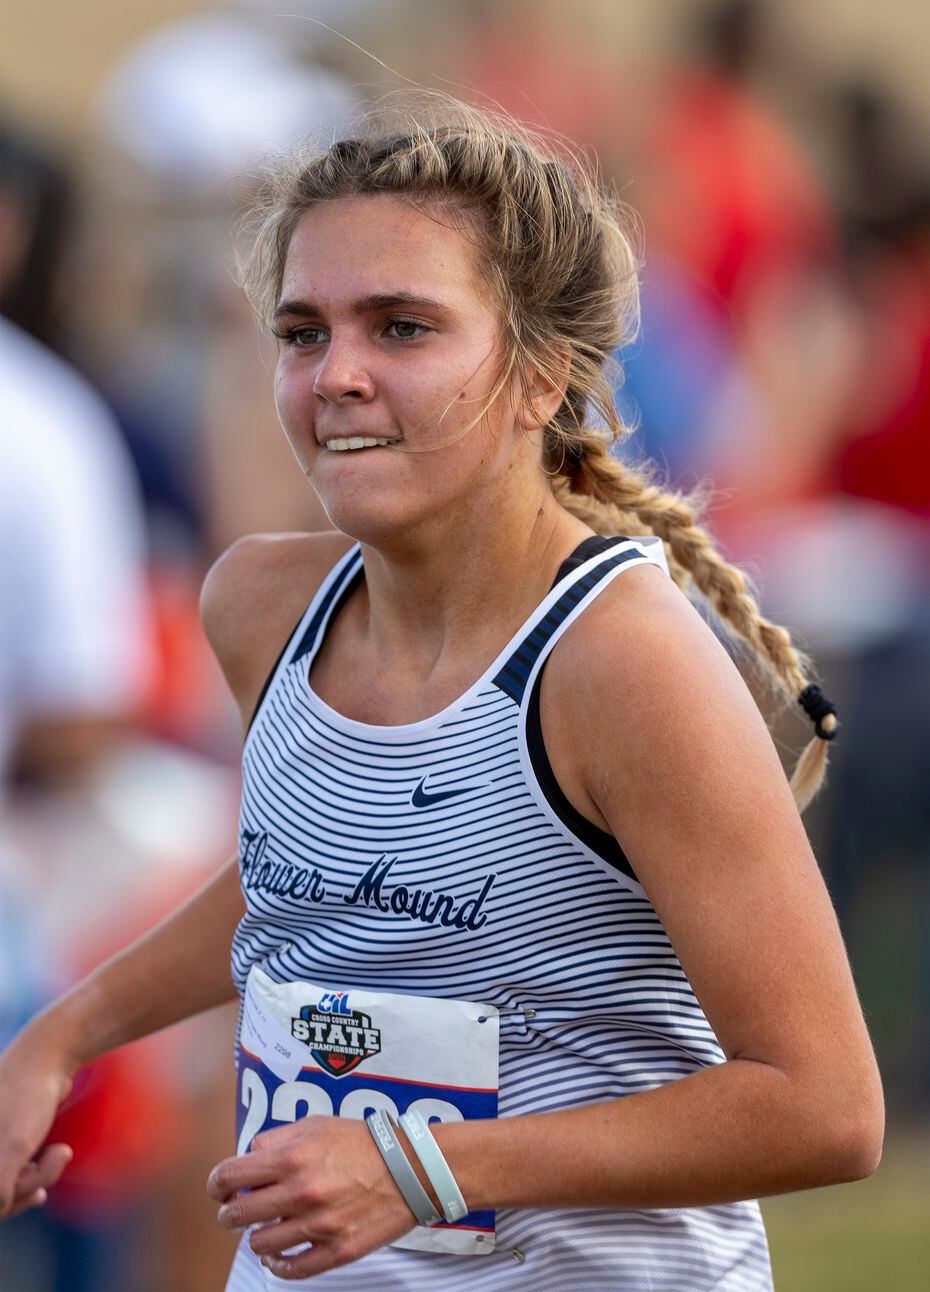 Flower Mound�s Natalie Cook (2298) finishes seventh in the girls UIL Class 6A state cross country meet in Round Rock, Tuesday, Nov., 24, 2019. (Stephen Spillman/Special Contributor)